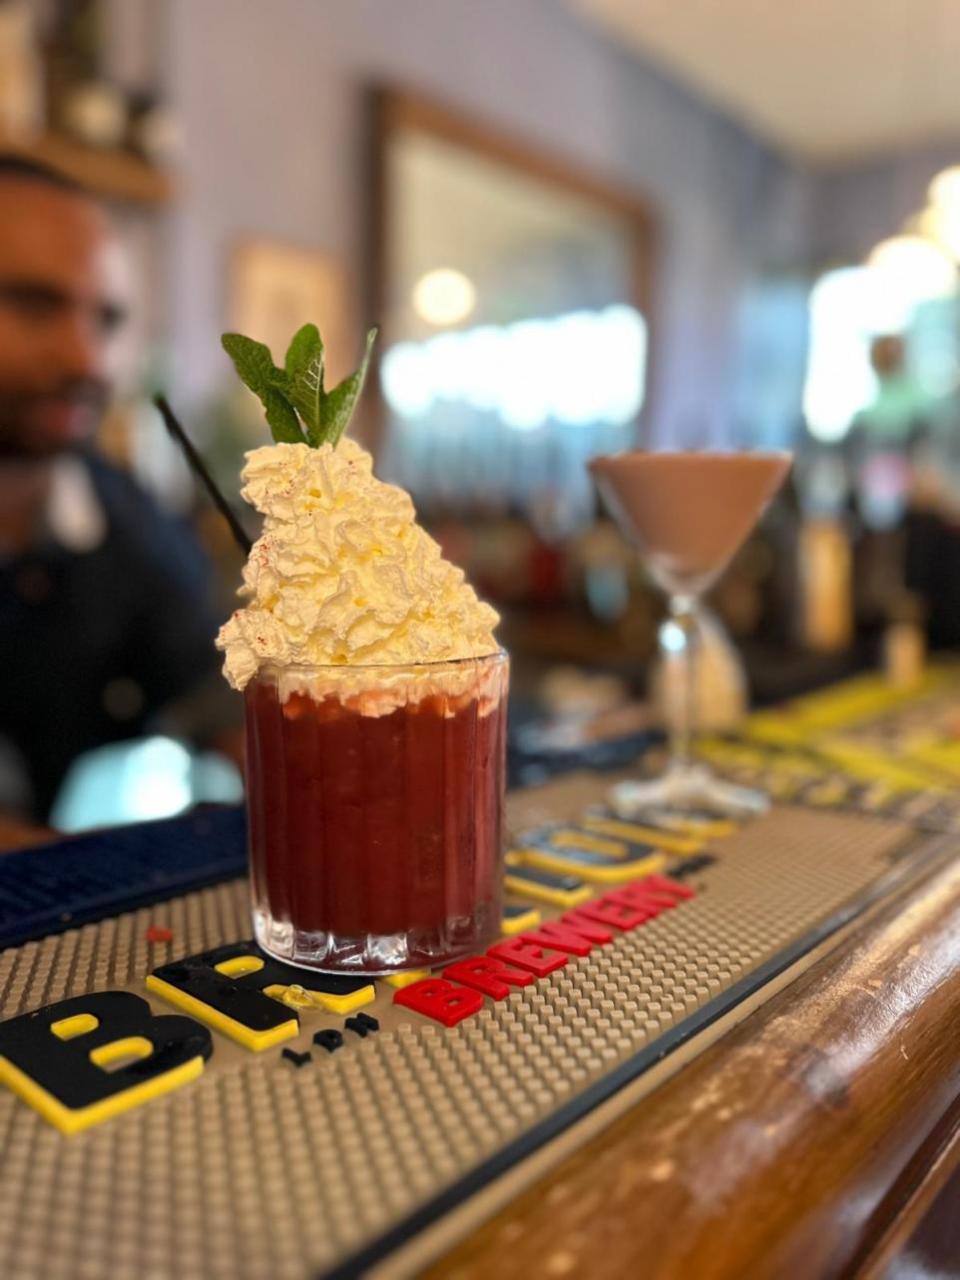 News Shopper: The Cherry Bakewell cocktail was a play on the popular sweet treat, made with whipped cream, amaretto and cherry.